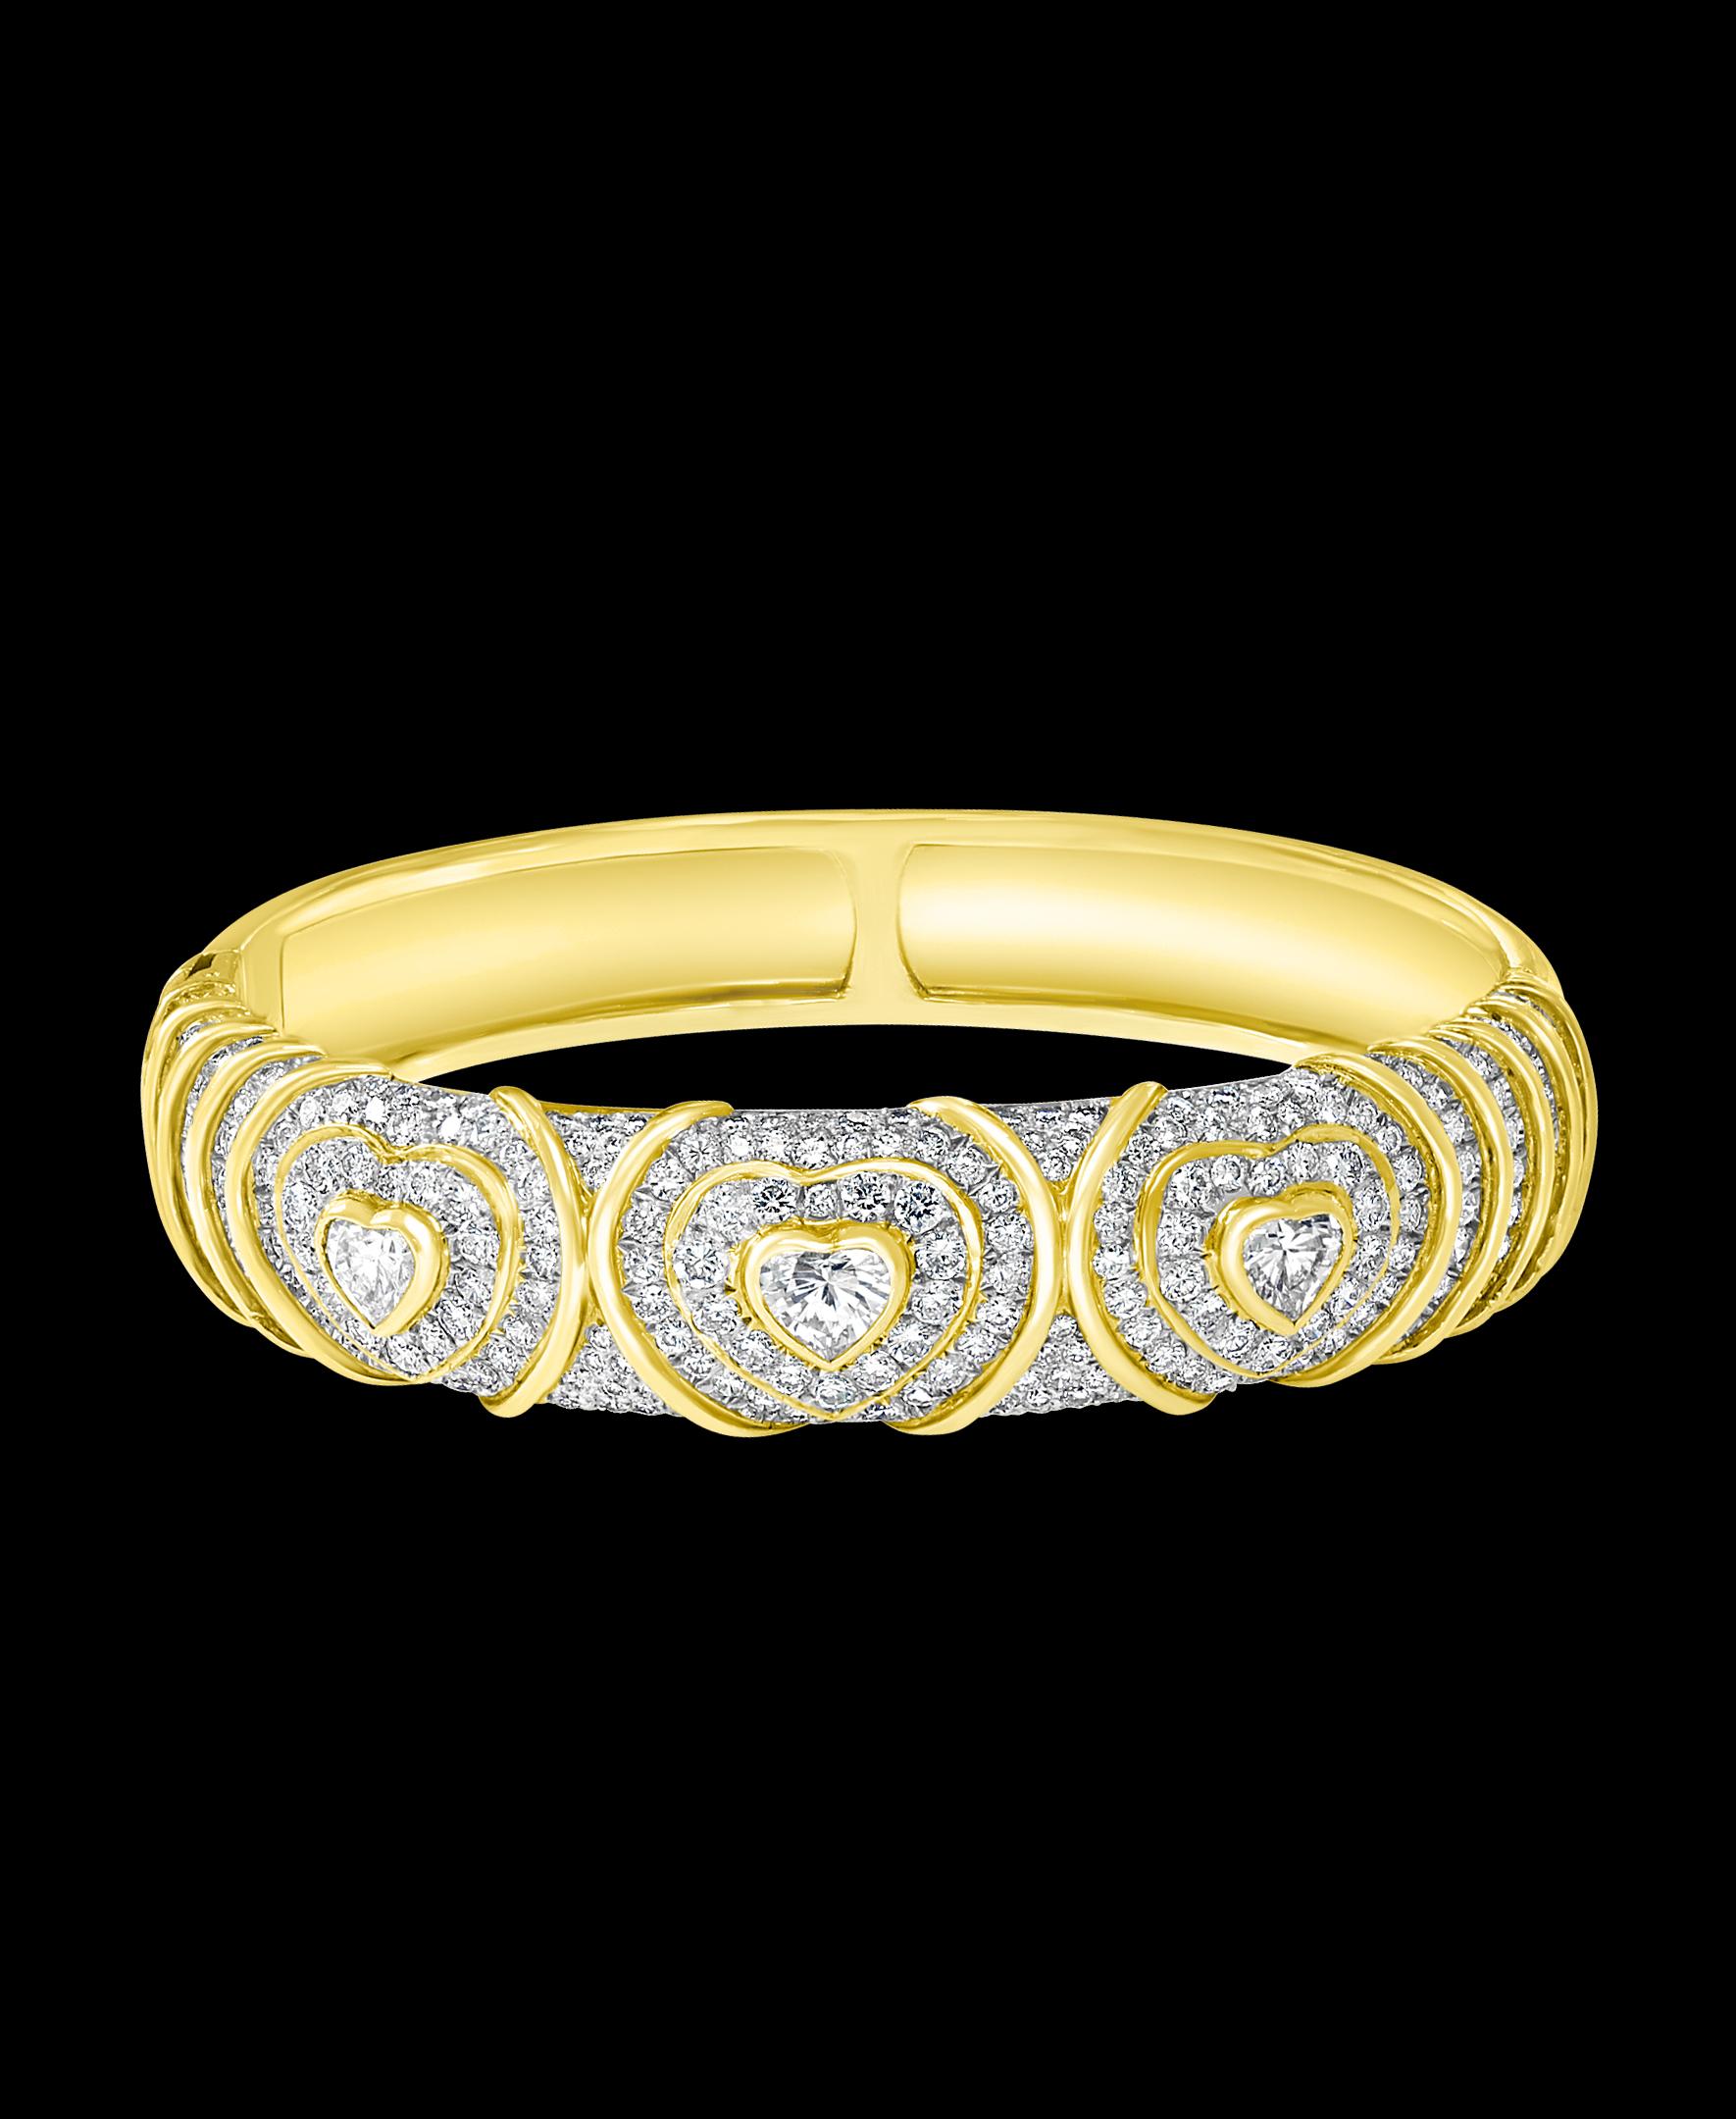 10 Carat Diamond  Heart shape  Bangle /Bracelet In 18 Karat Yellow Gold 48 Grams
It features a bangle style  Bracelet crafted from an 18k Yellow gold and embedded with   3 solitaire heart shape diamonds and  total approximately 10 Carats with  Round